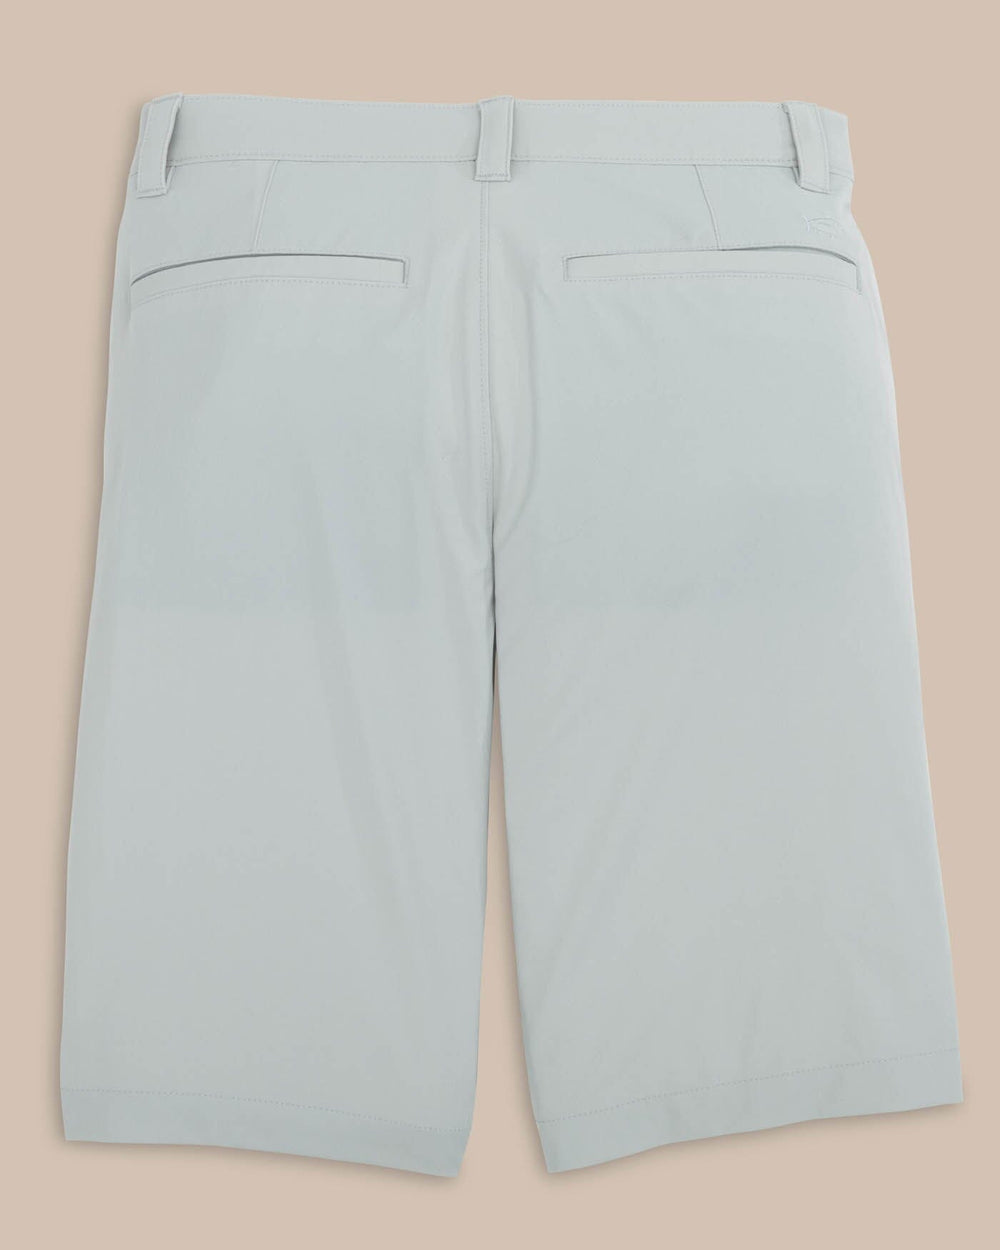 The back view of the Southern Tide brrr die 10 Short by Southern Tide - Seagull Grey